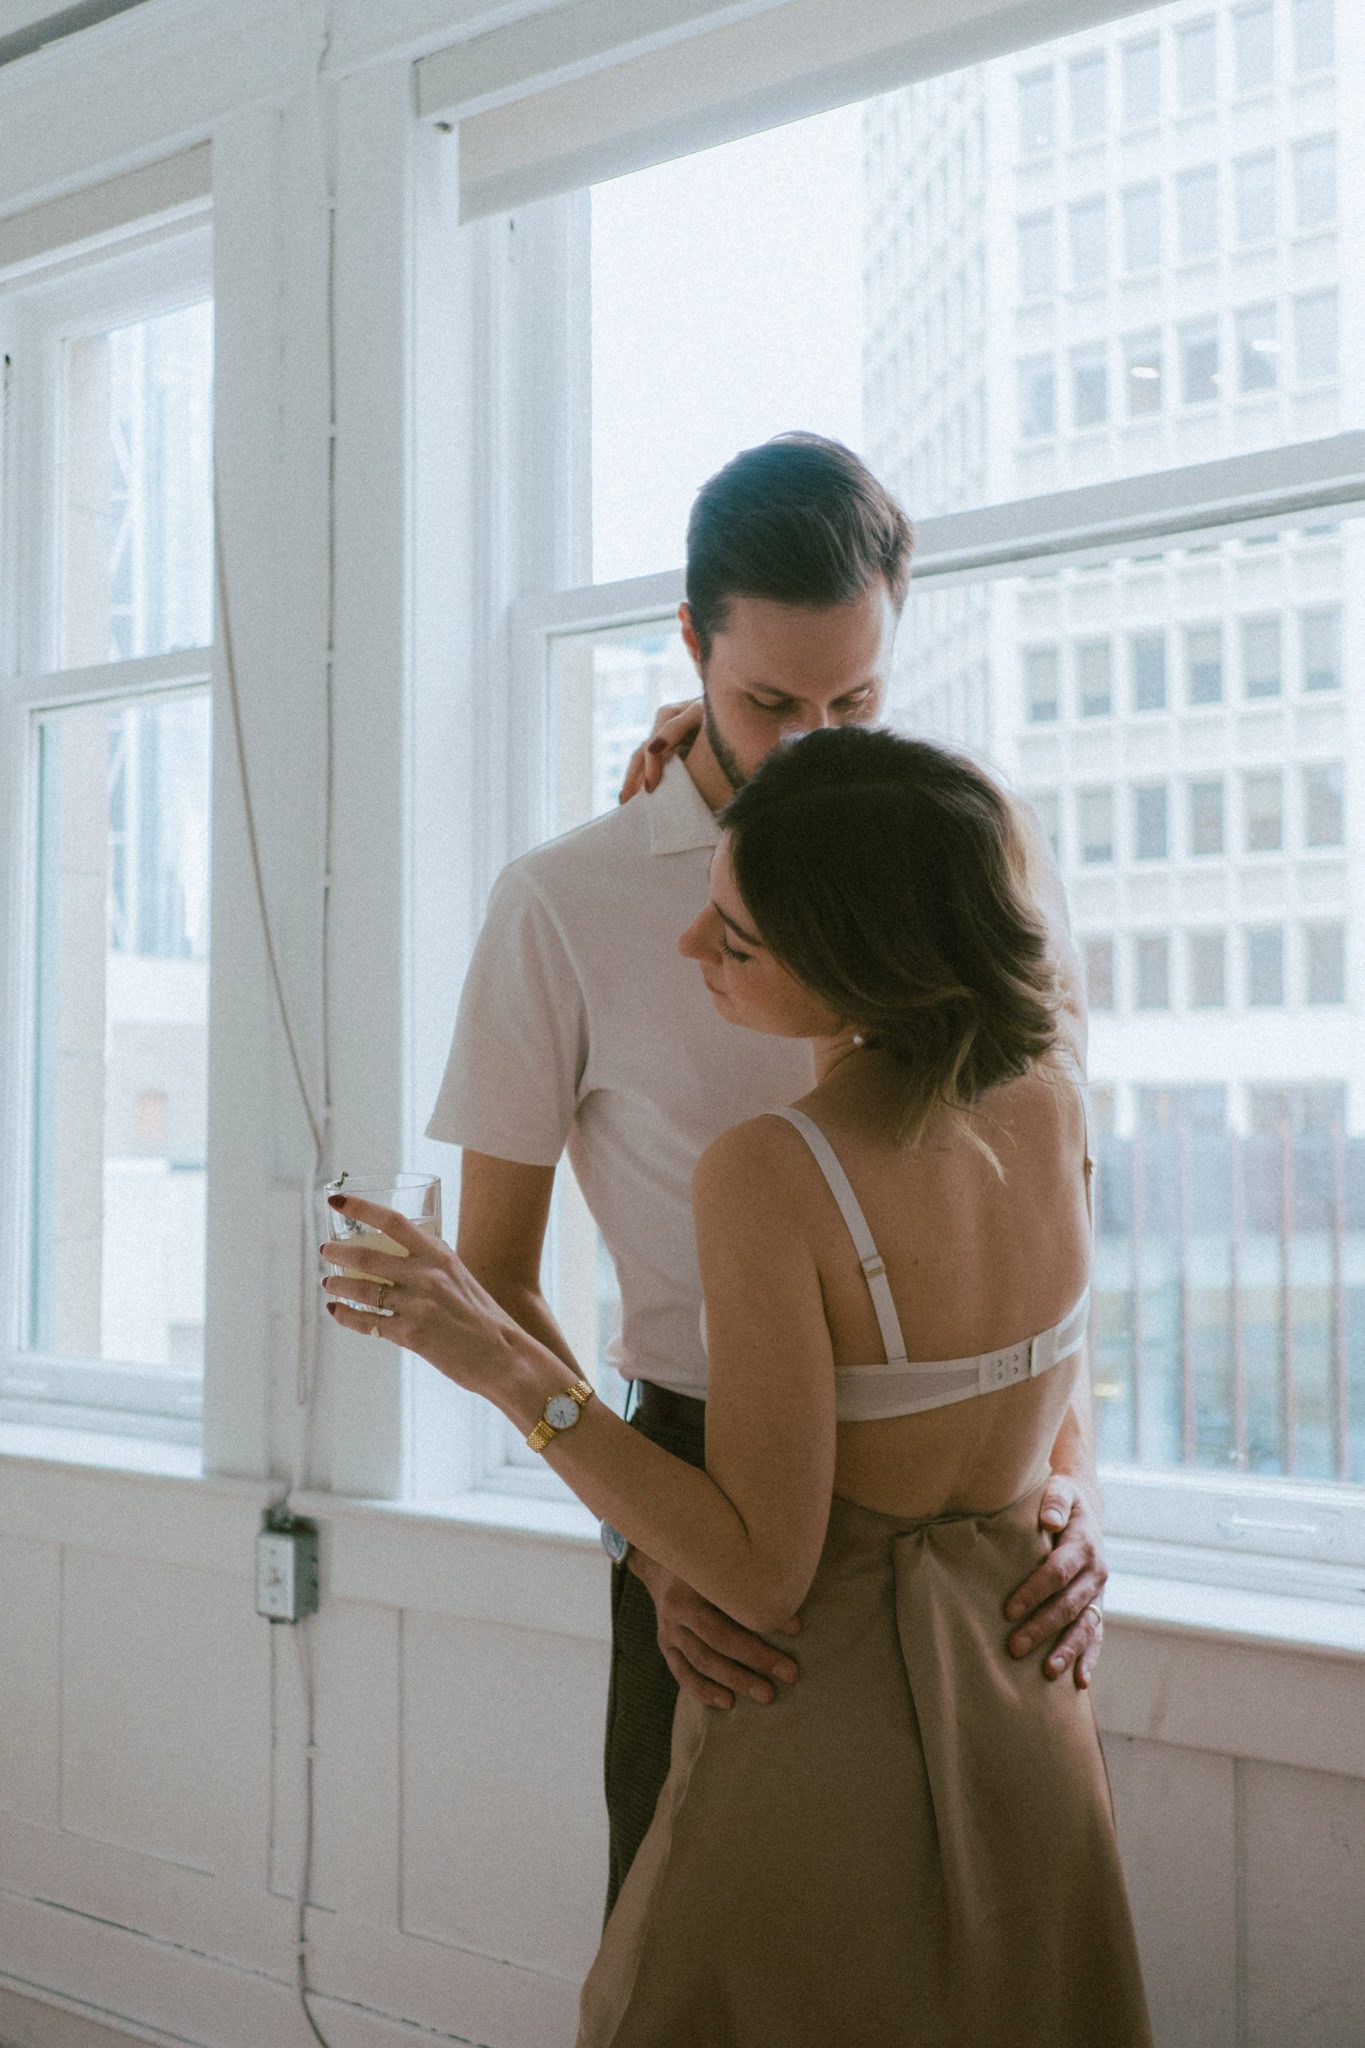 Retro aesthetic and vintage vibes in a self-love couple session.